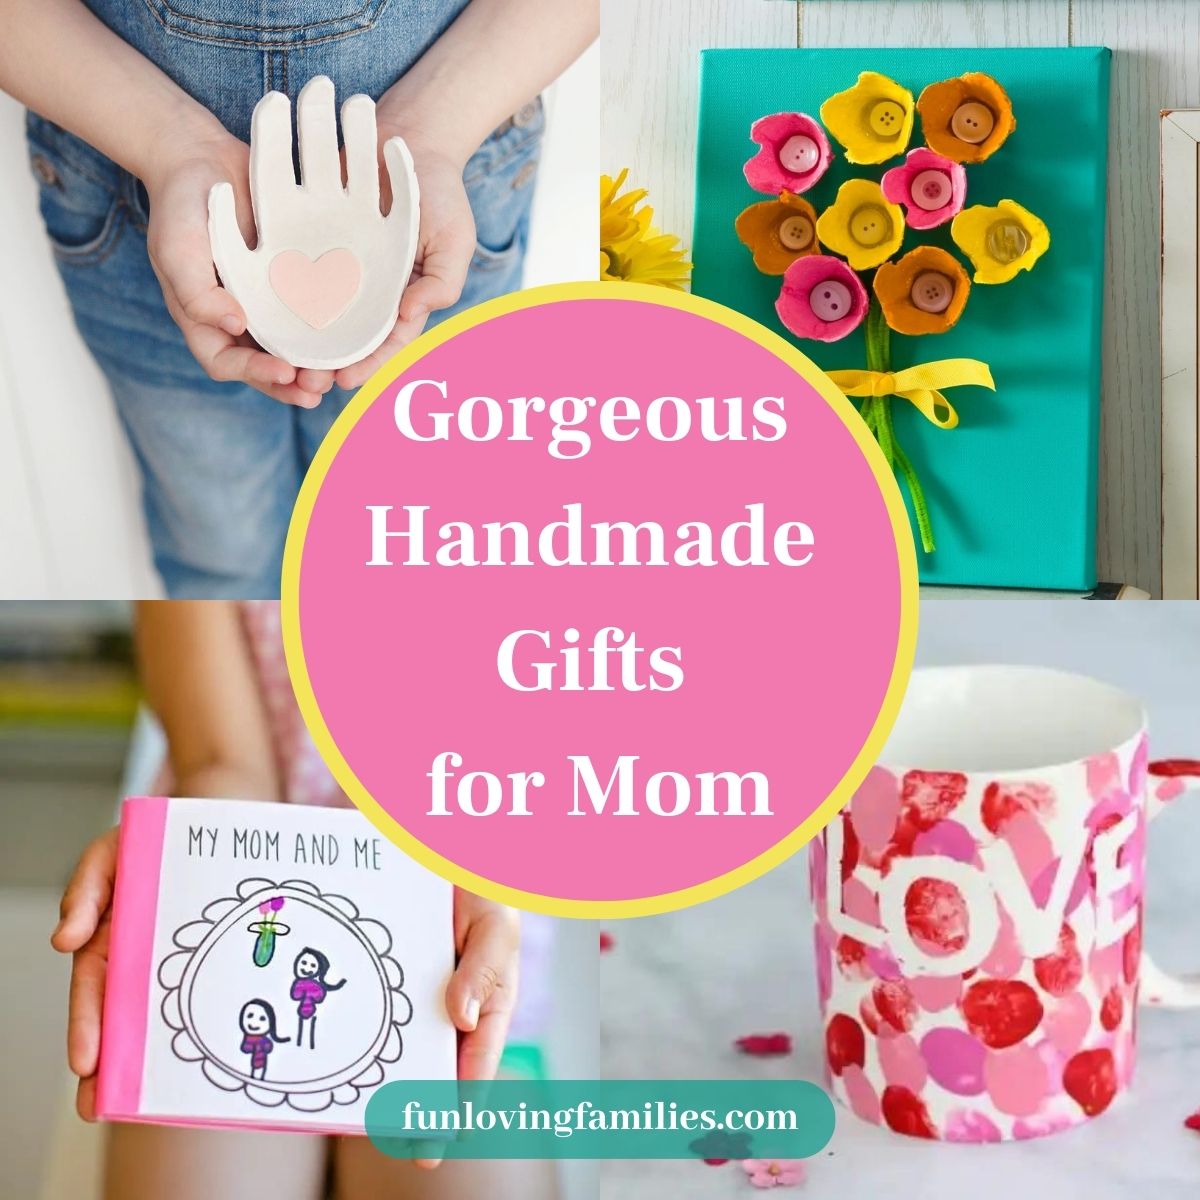 Gorgeous Handmade Gifts for Mom